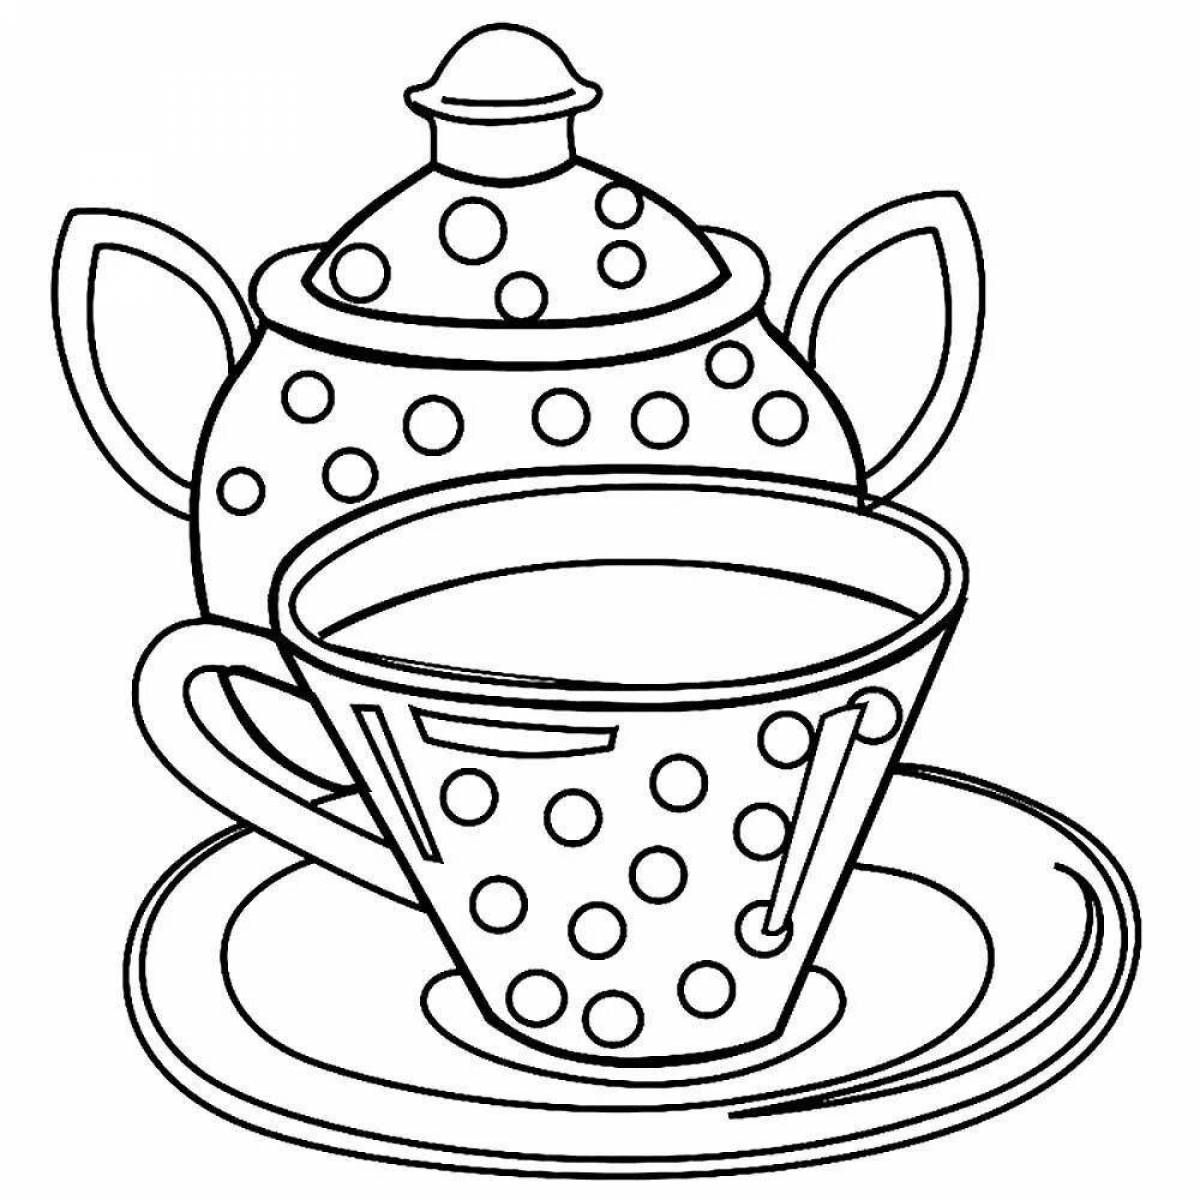 Serene teacup coloring page